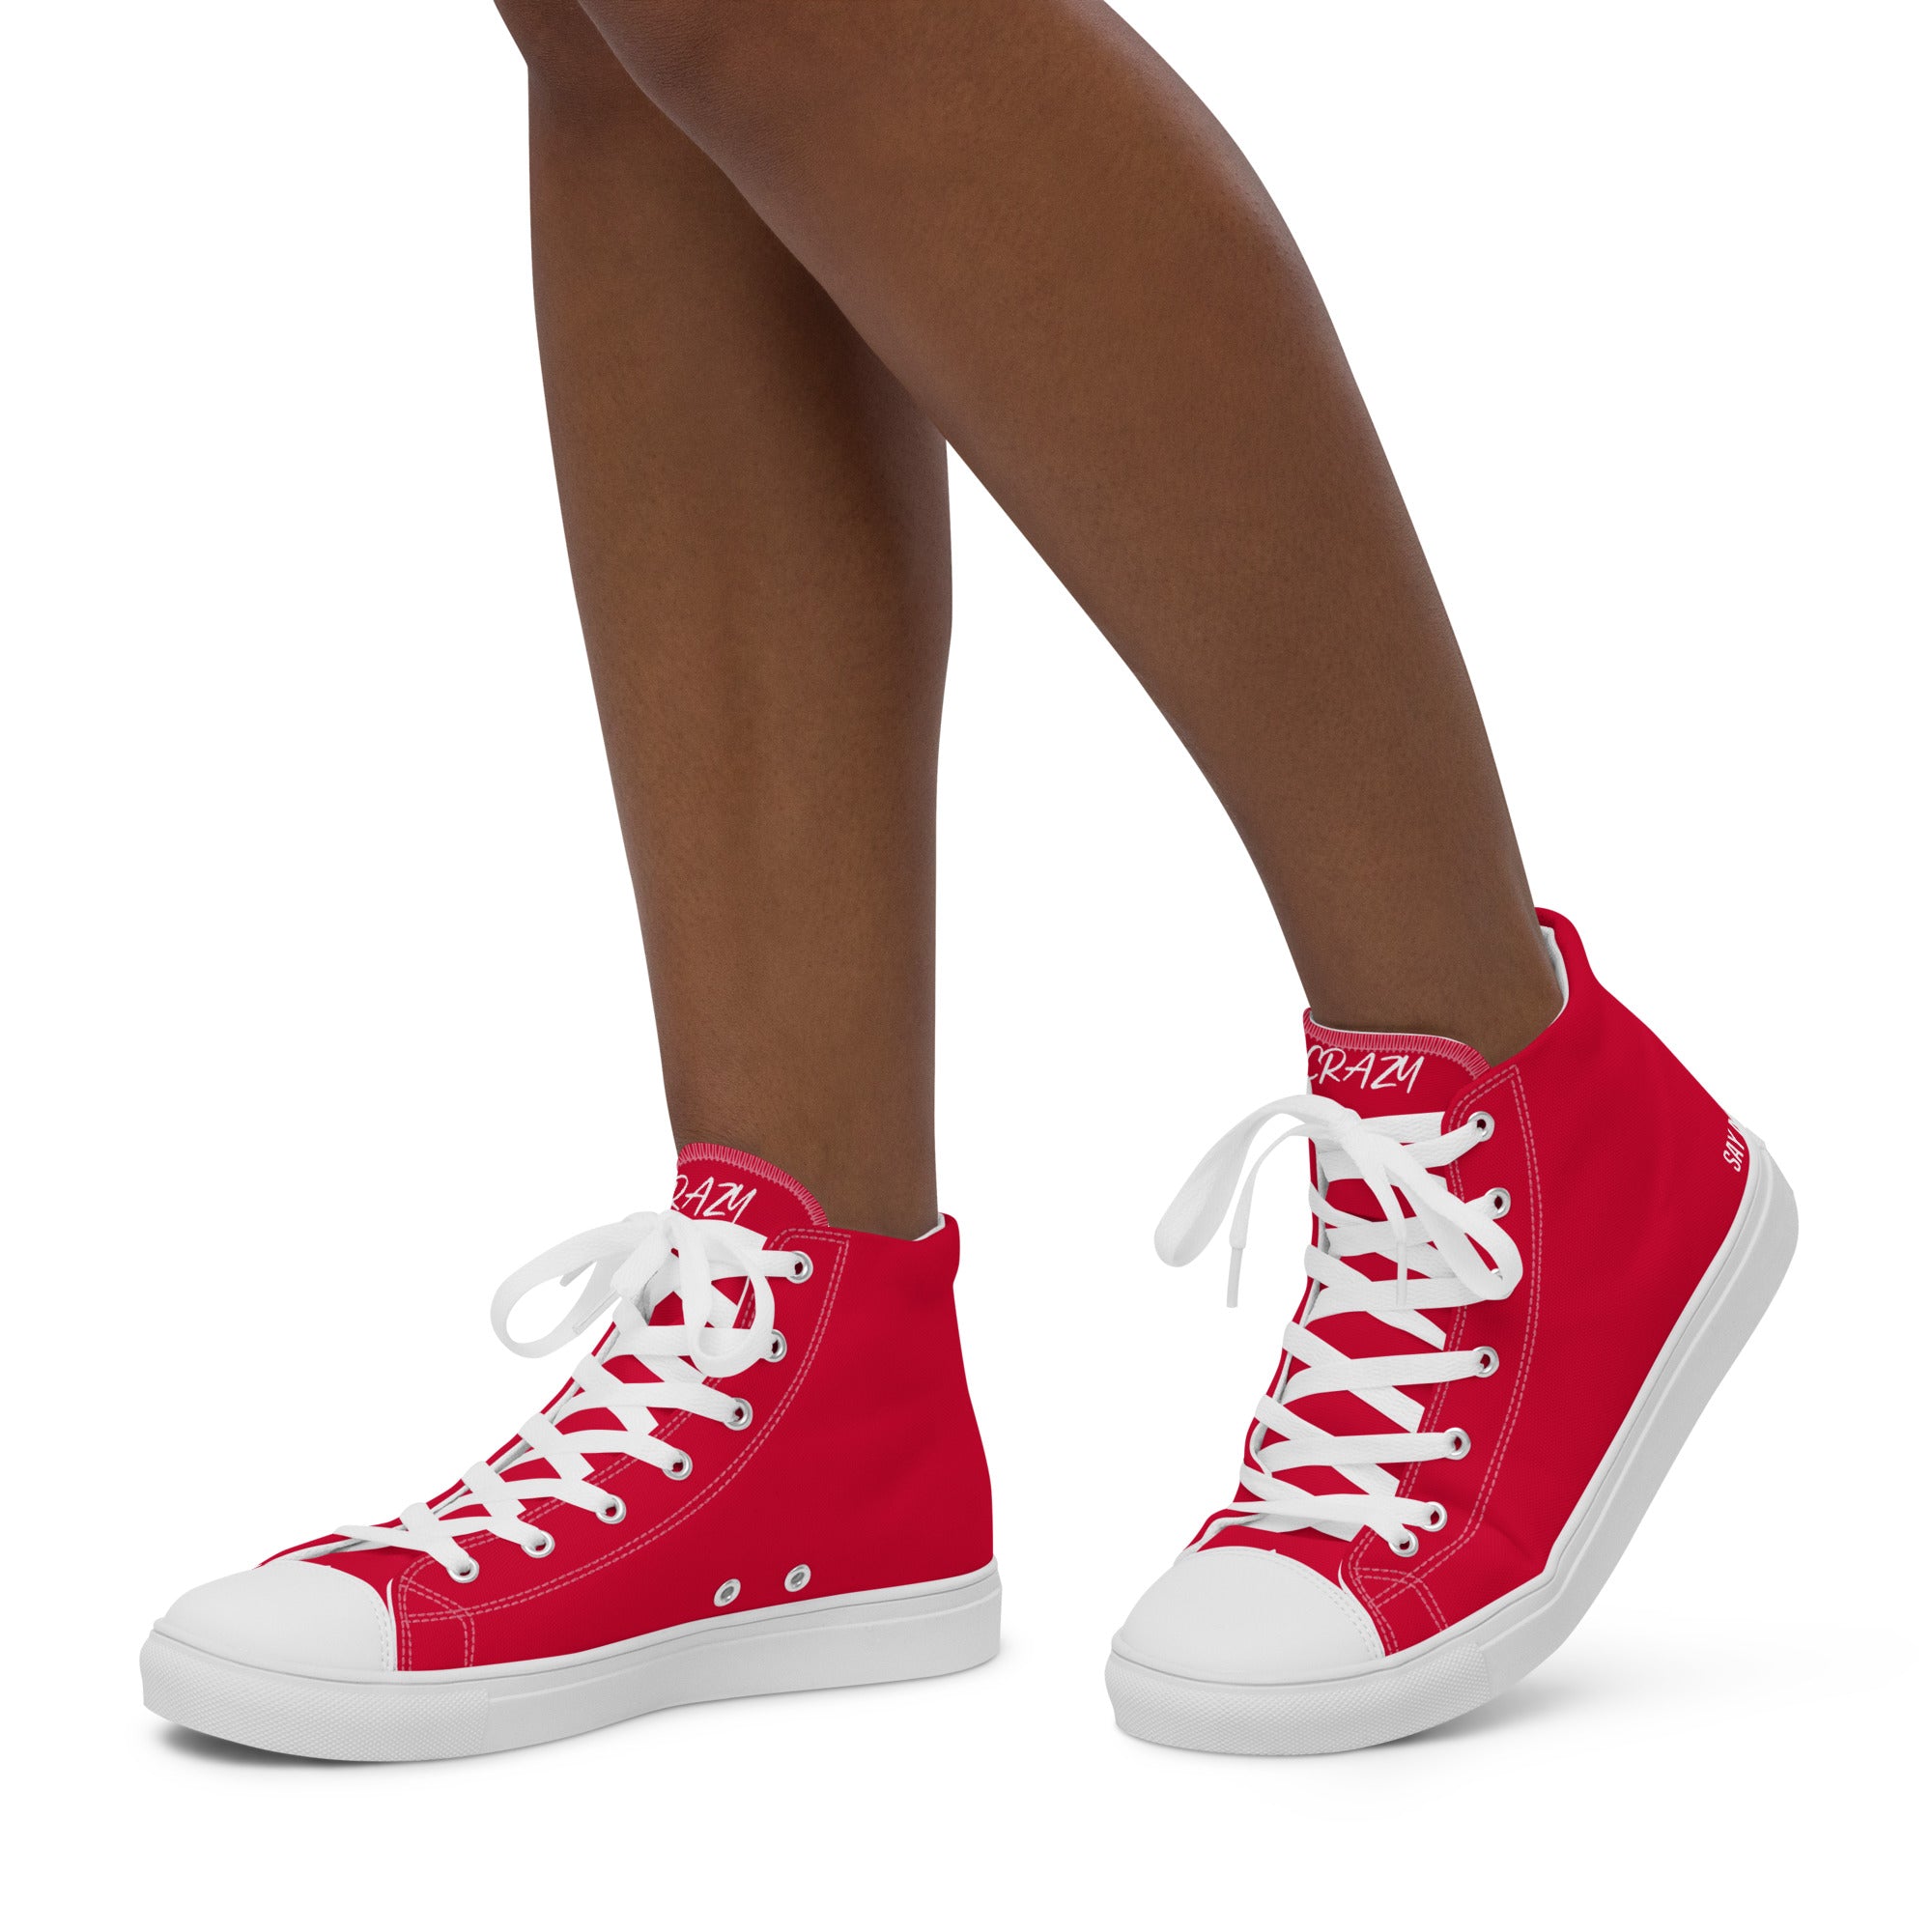 "SAY MY NAME" women's high red canvas sneakers